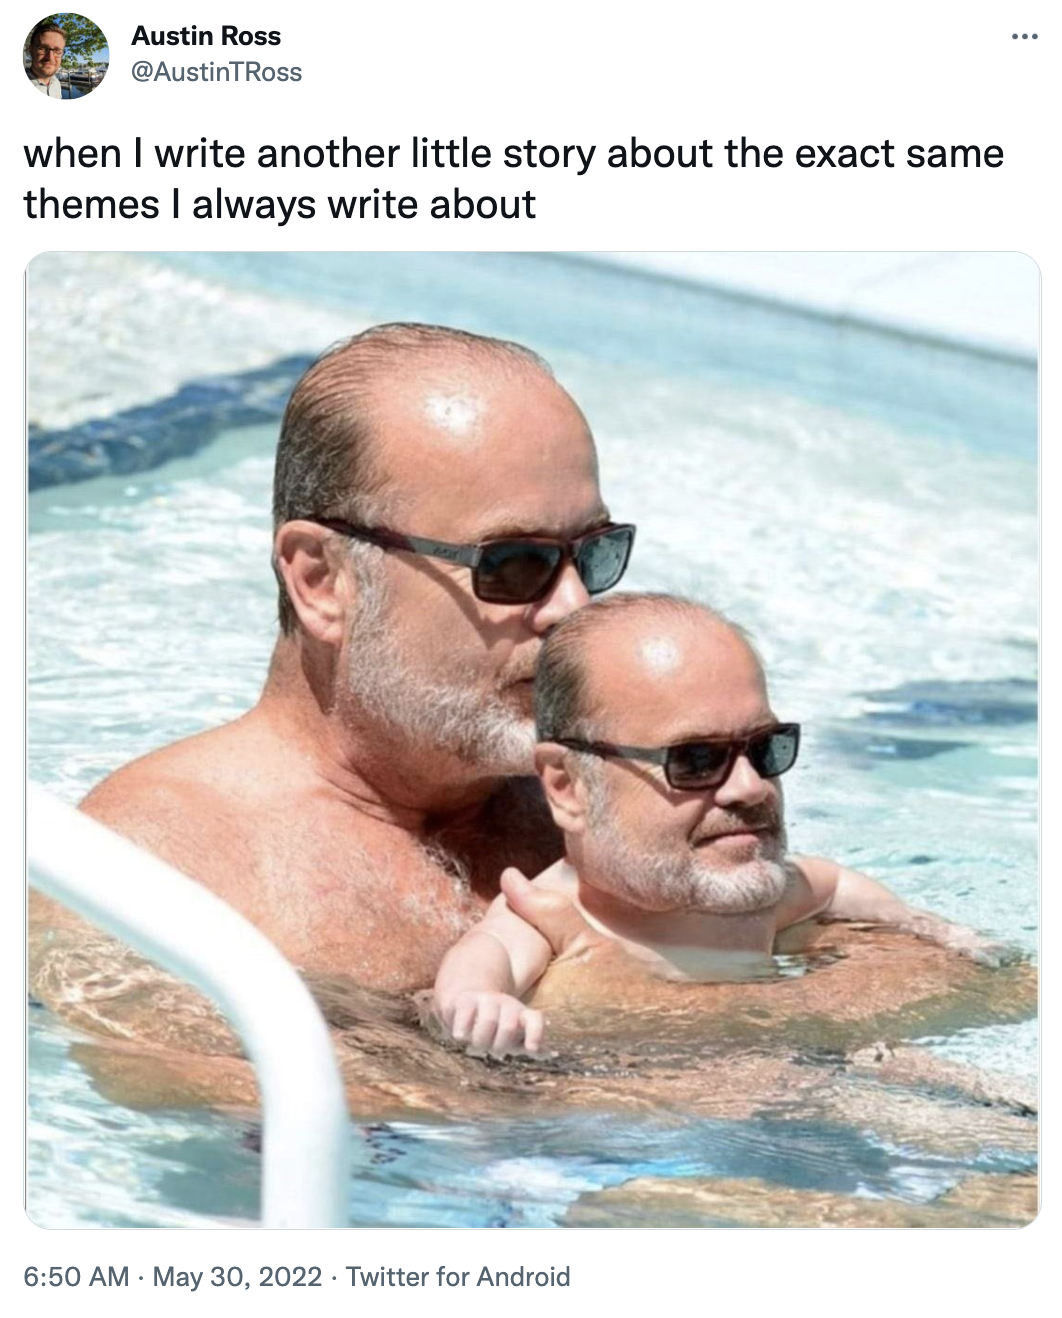 A tweet with a Photoshopped picture of actor Kelsey Grammer holding a baby with Kelsey Grammer's head in the pool, captioned "when I write another little story about the exact same themes I always write about."